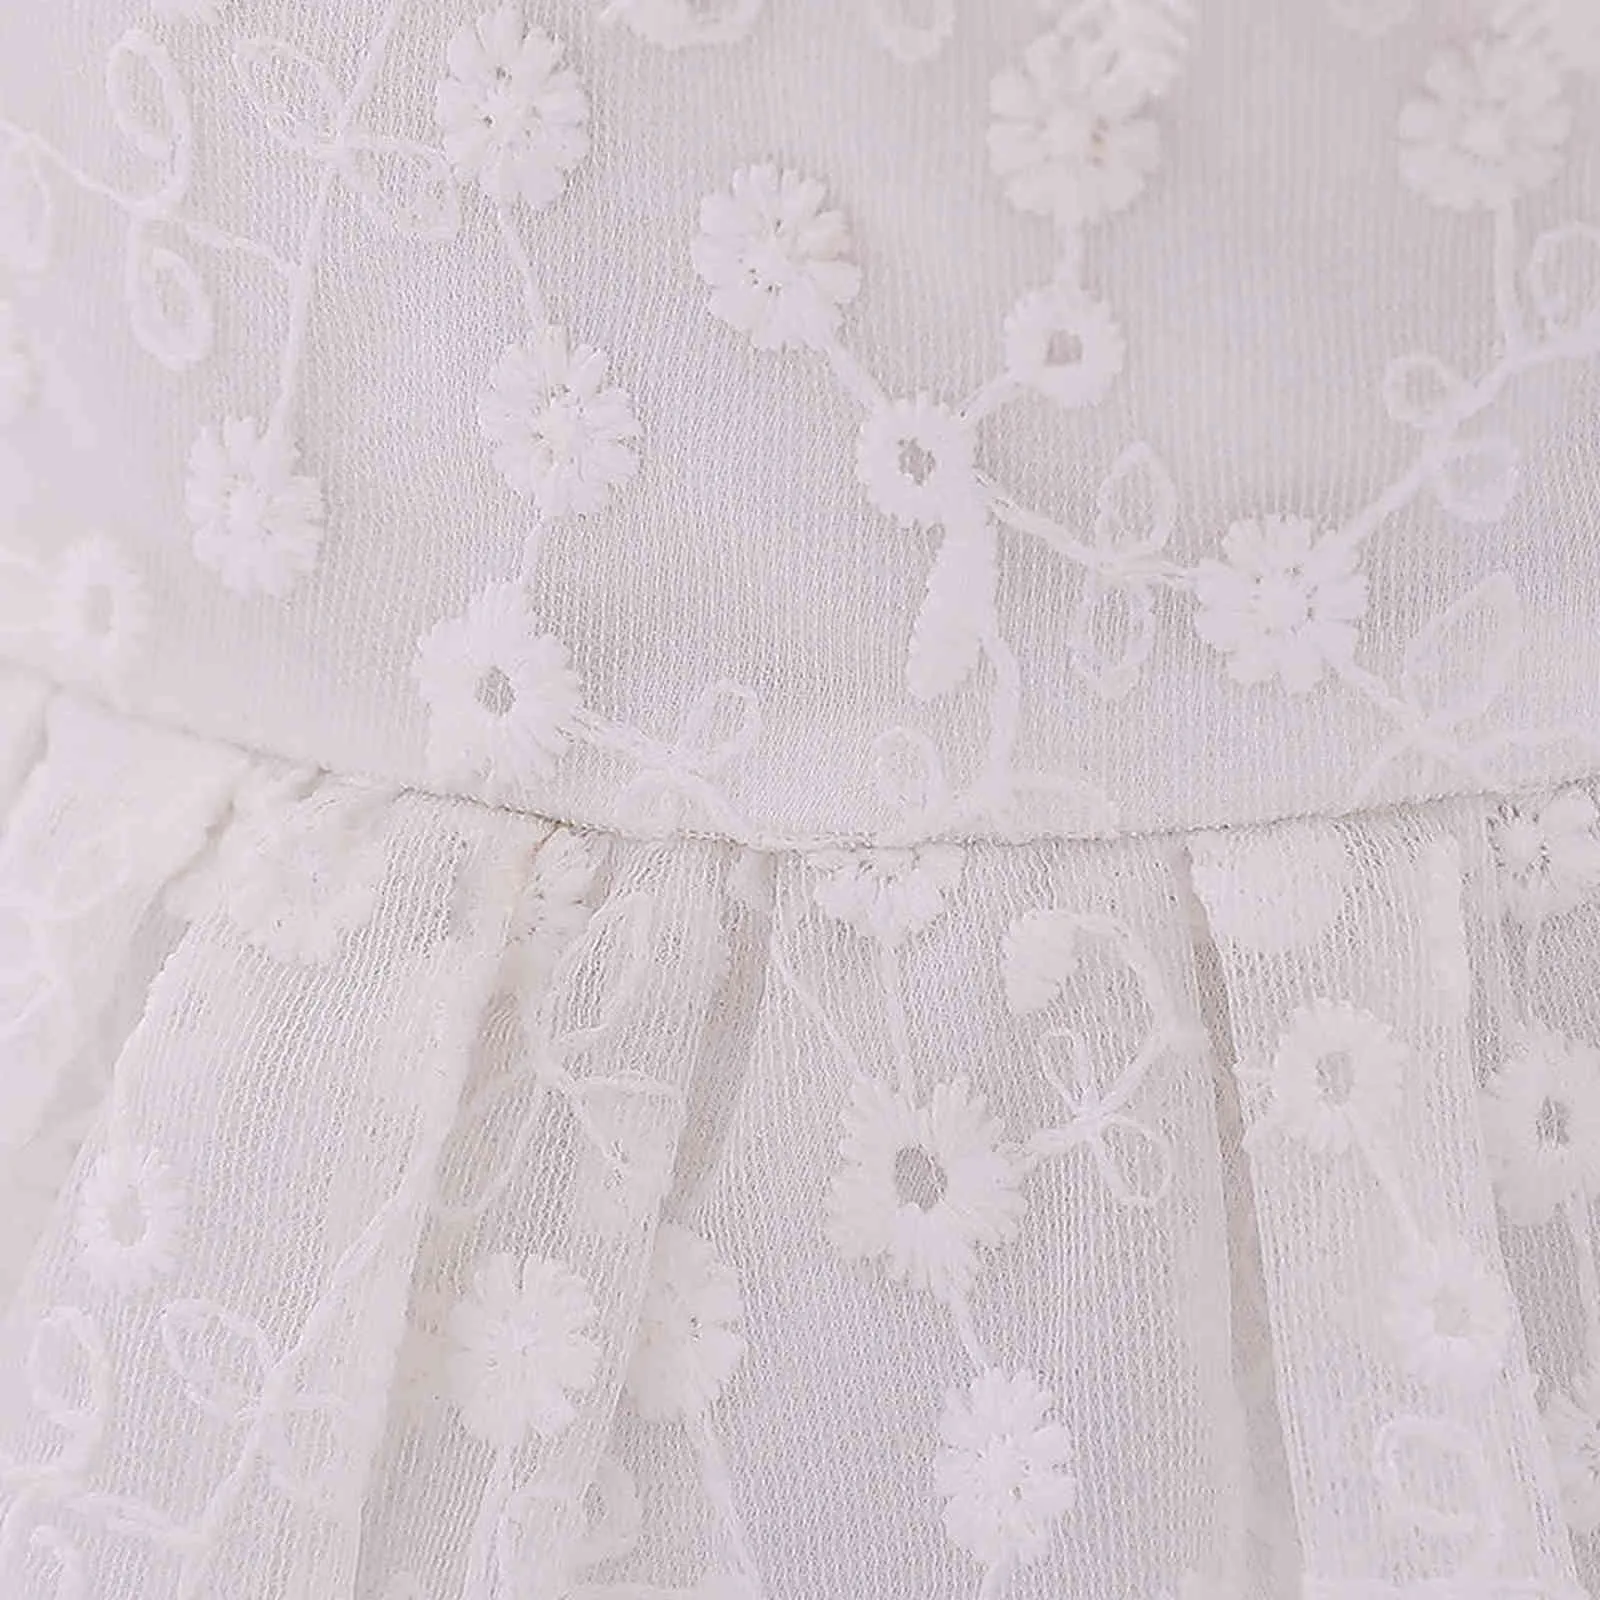 Baby Baptism Dresses For Girl Christening Gowns Wedding Party Lace Dress Infant Baby 1st Year Birthday Princess Dress G1129